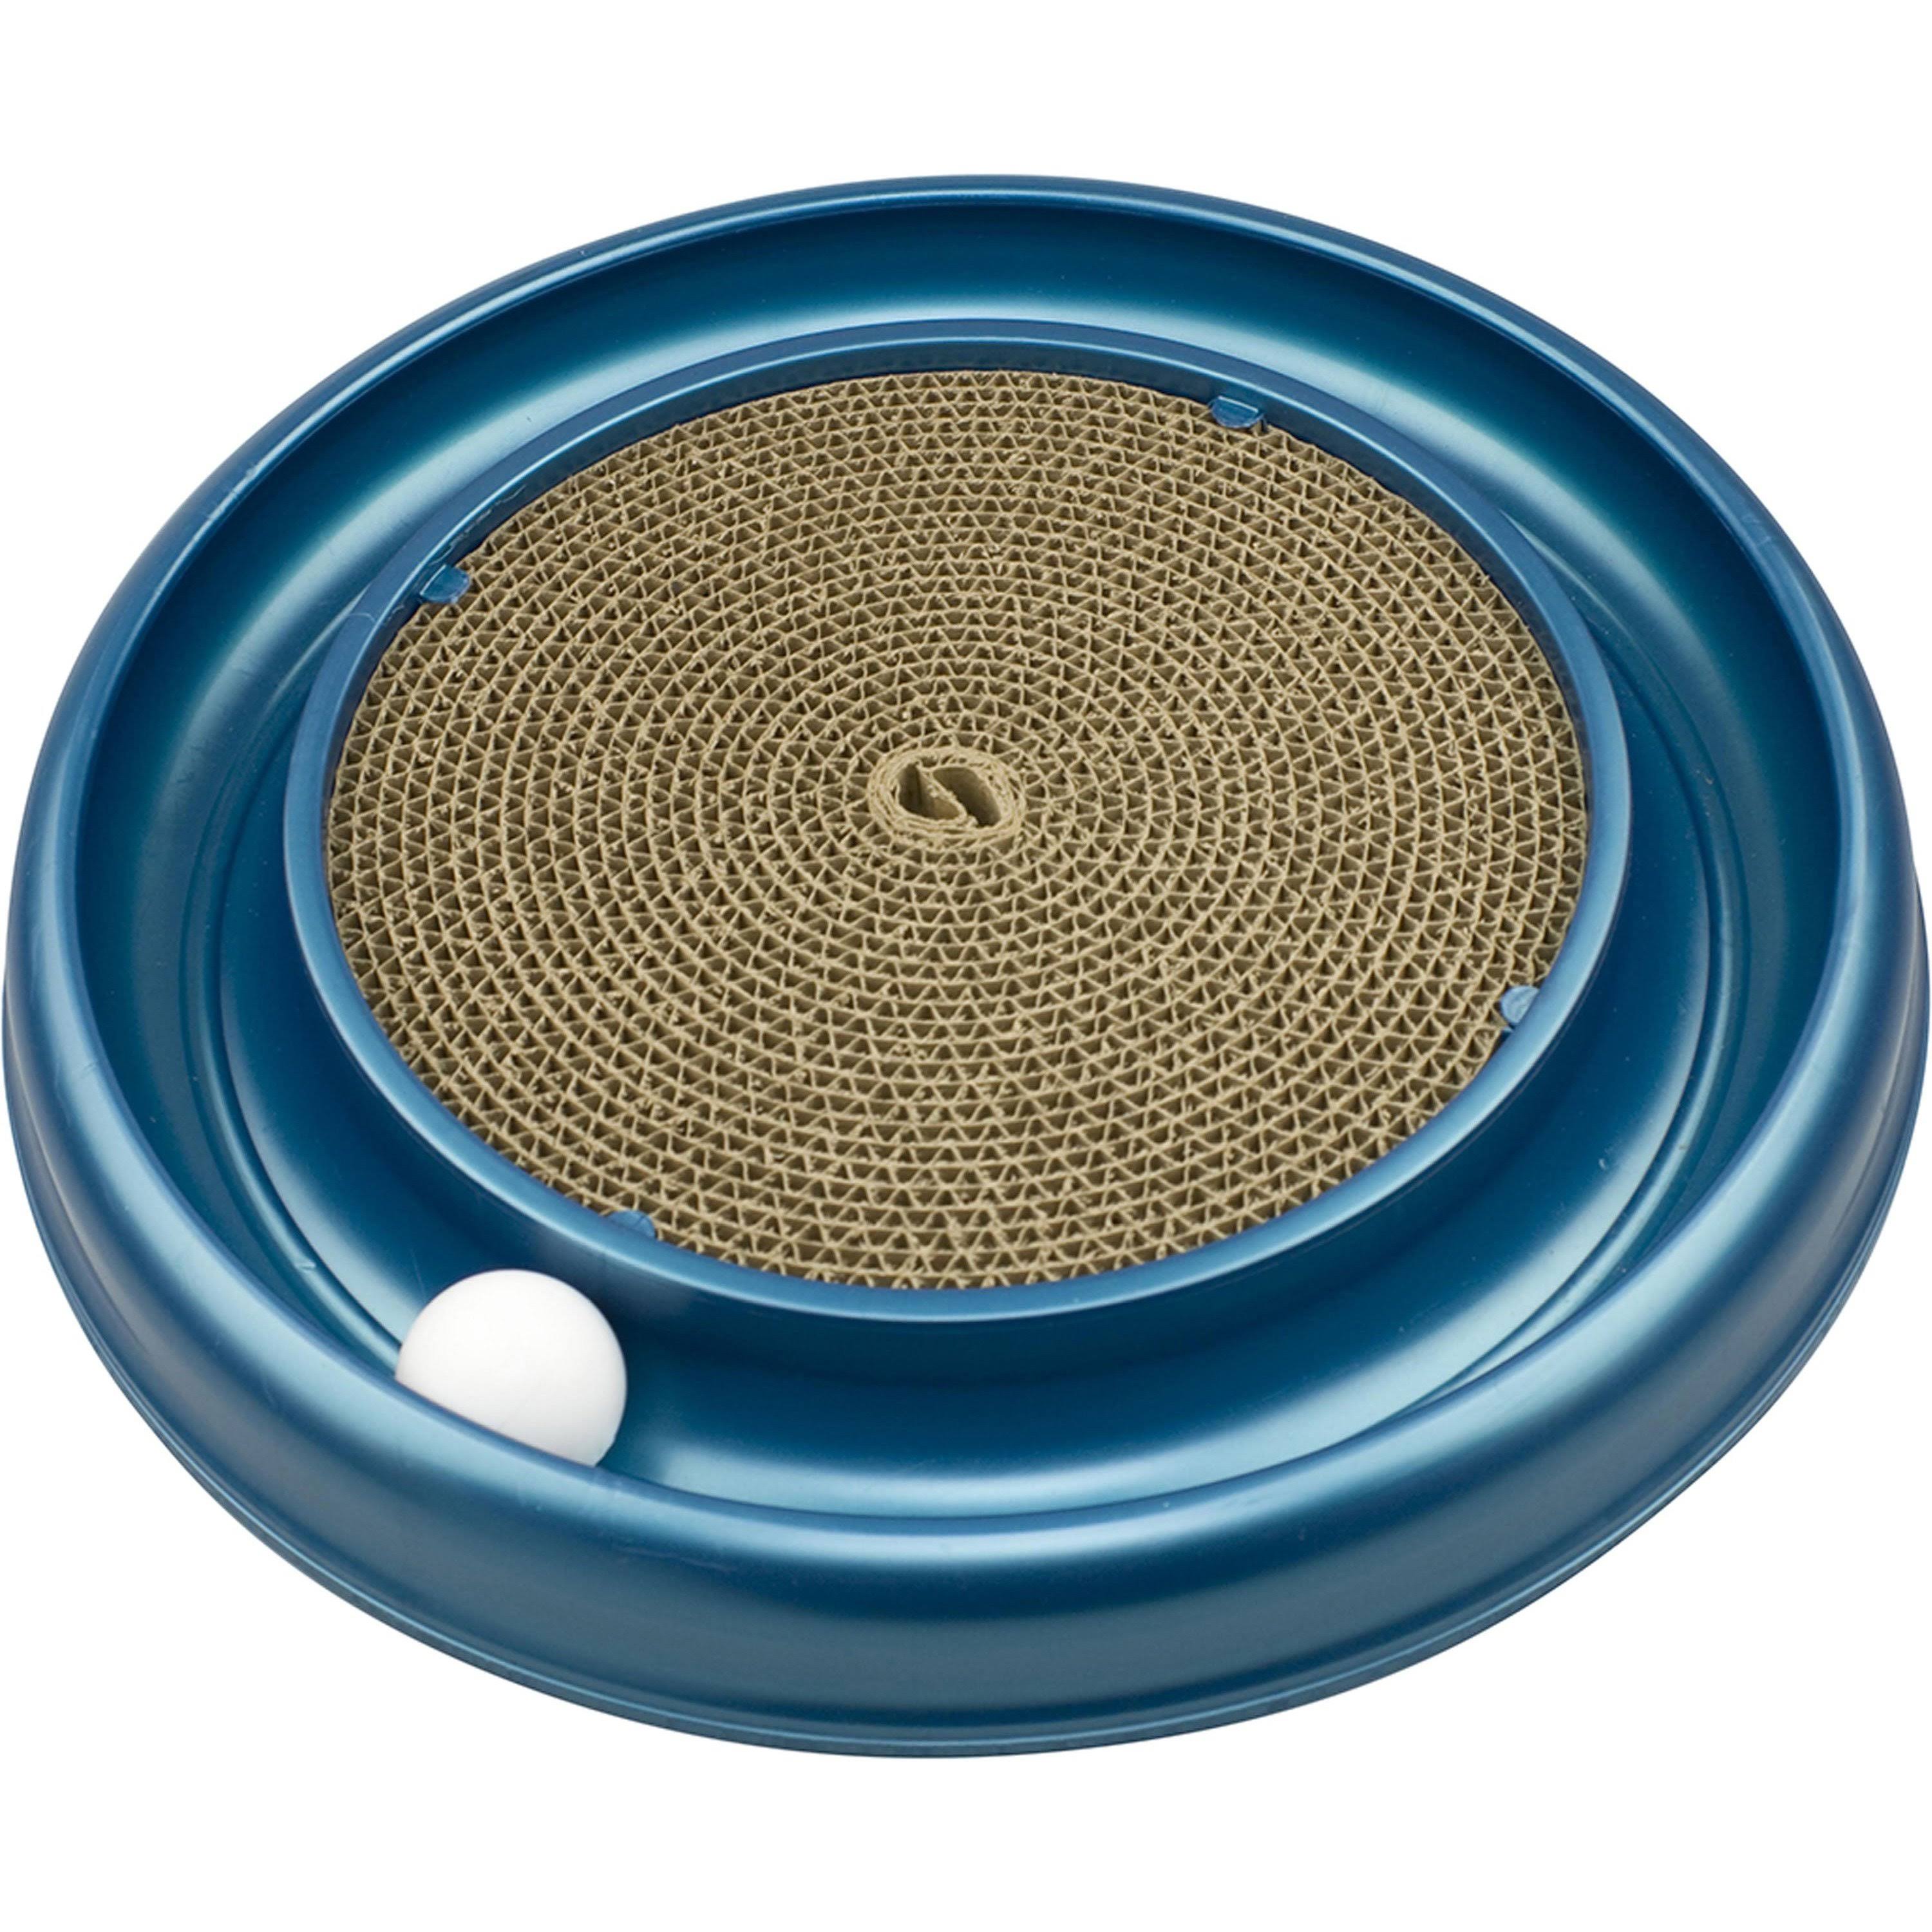 Bergan Turbo Scratcher Cat Toy - Colors May Vary